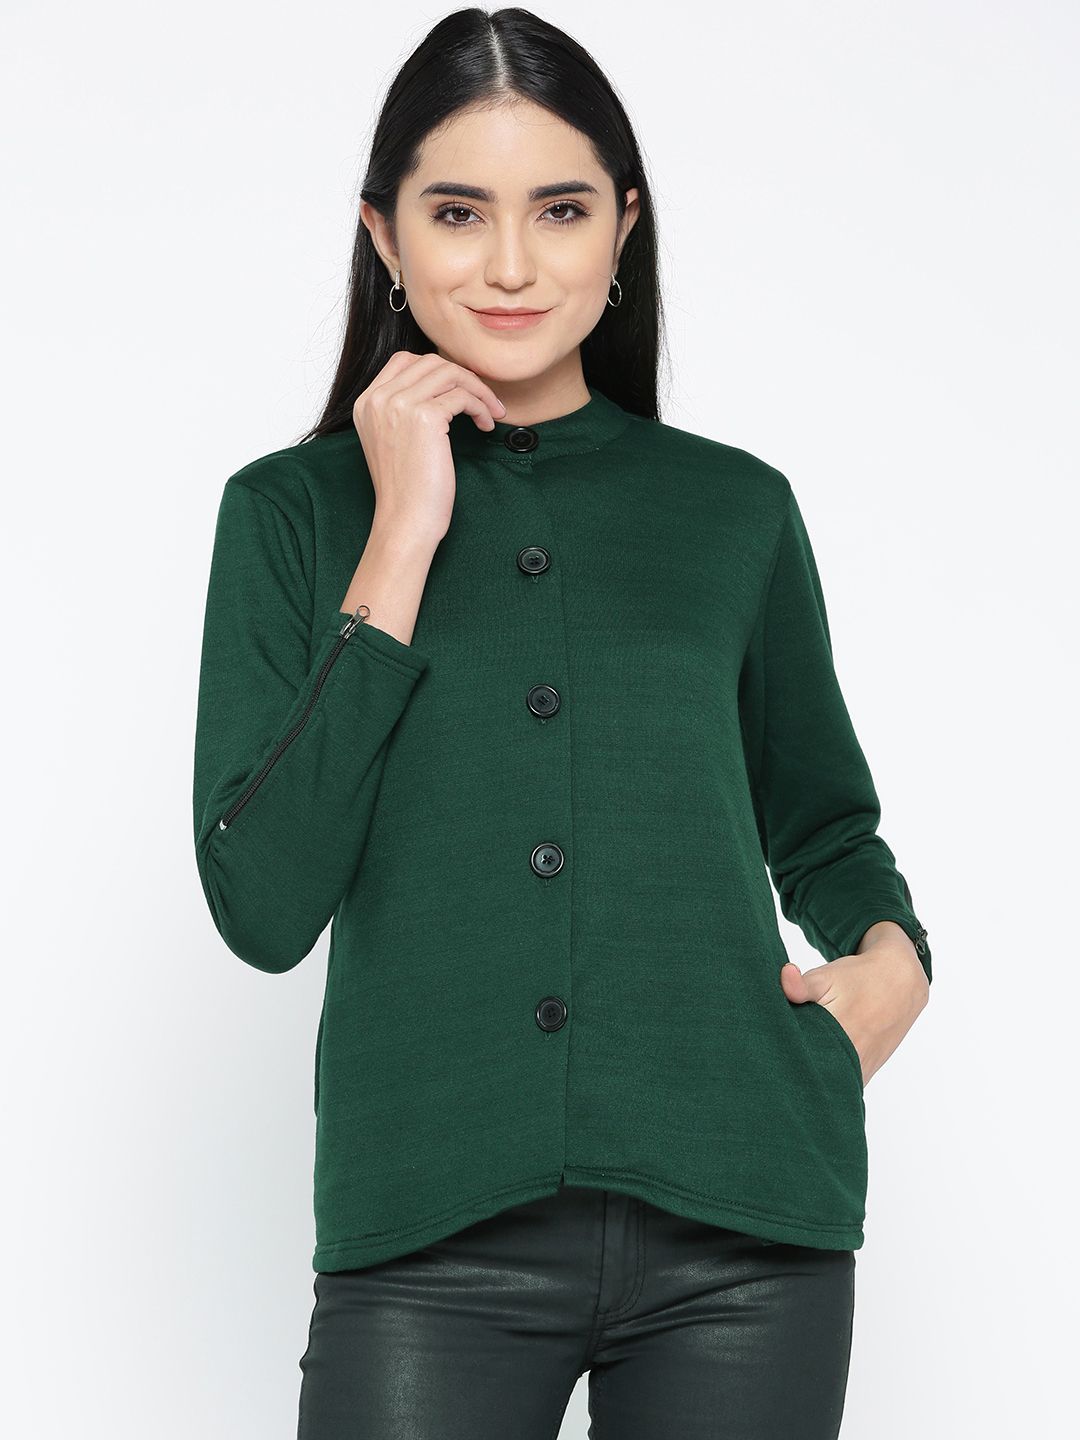 Belle Fille Women Green Solid Tailored Jacket Price in India